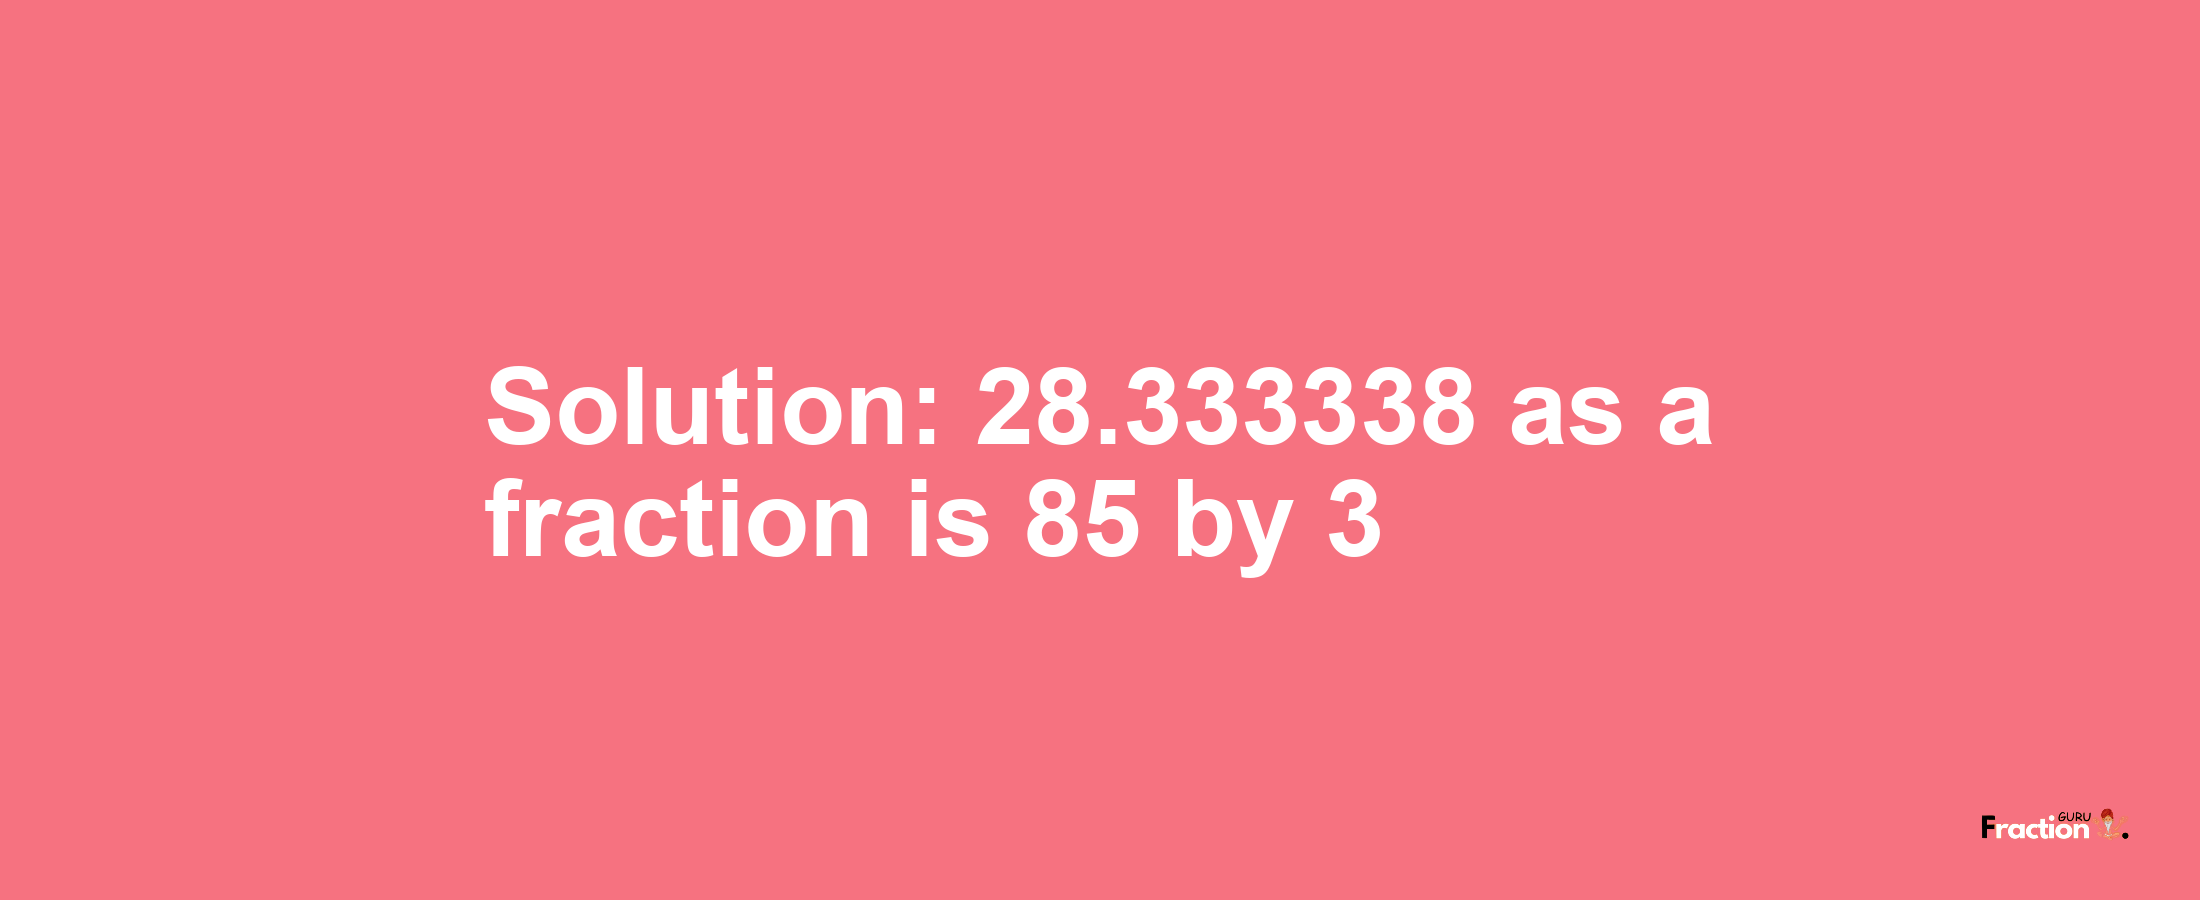 Solution:28.333338 as a fraction is 85/3